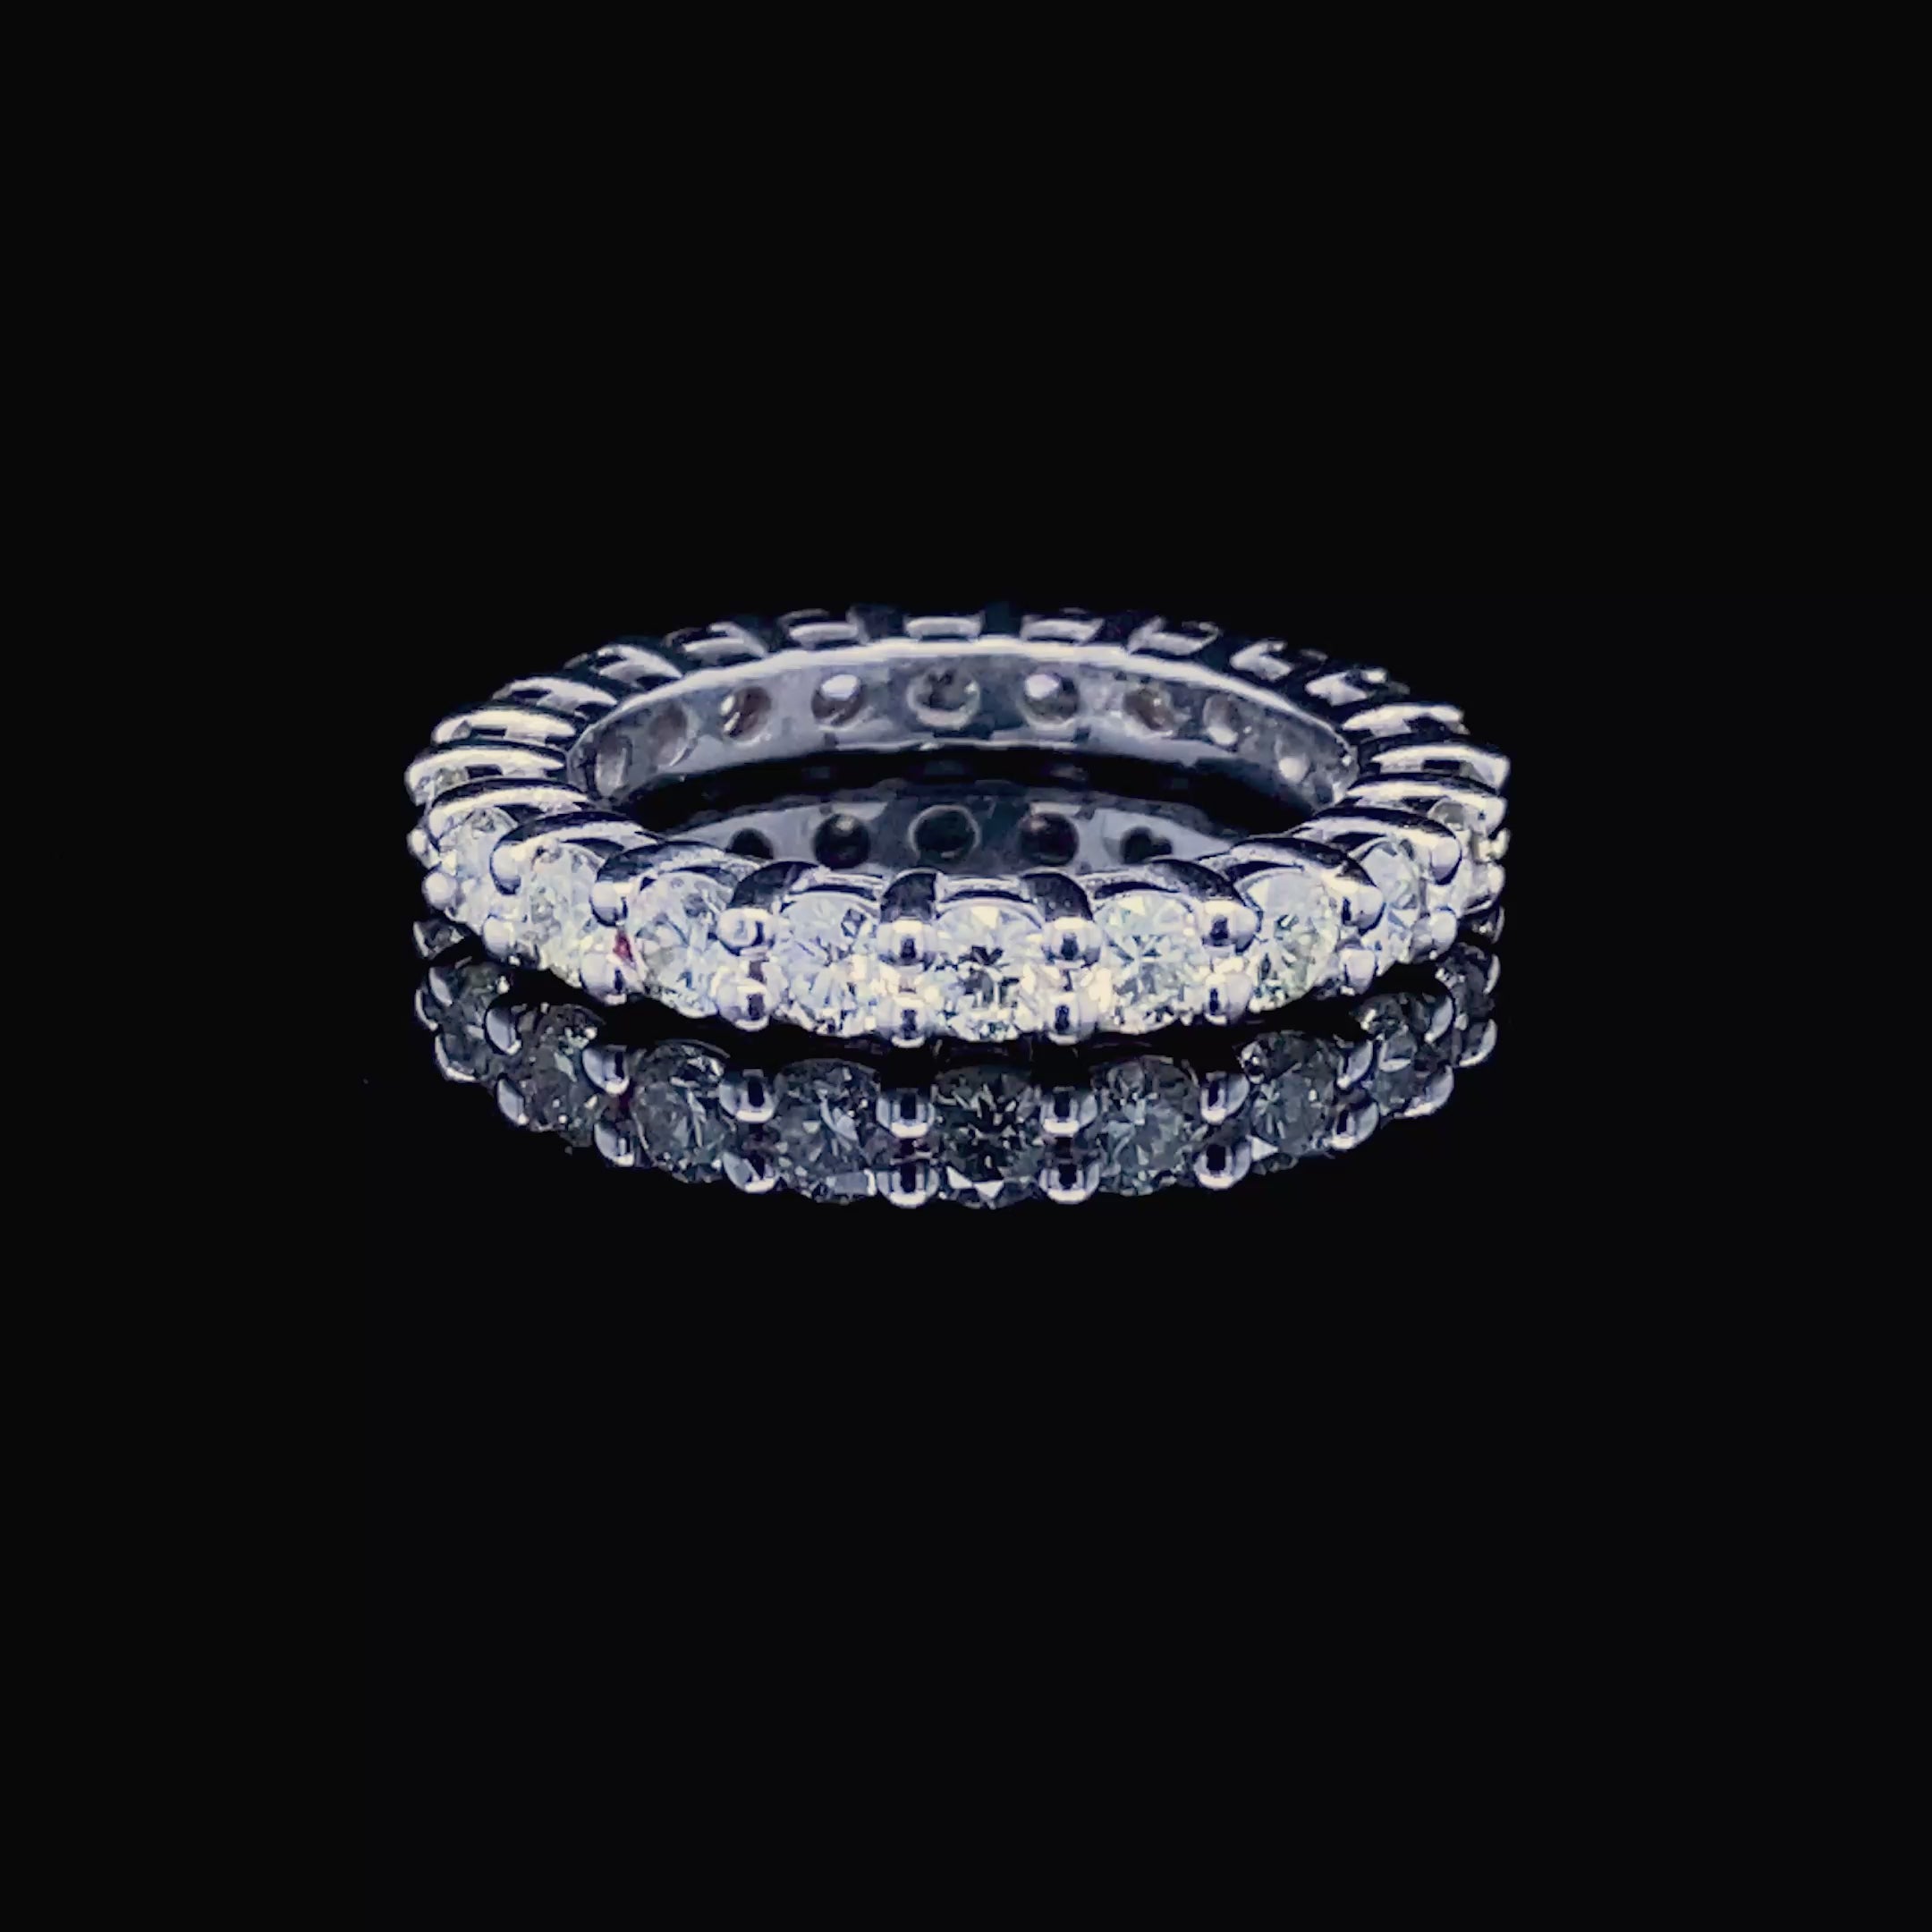 Quality 2.50CT Round Cut Diamond Eternity Ring  in 18kt White Gold